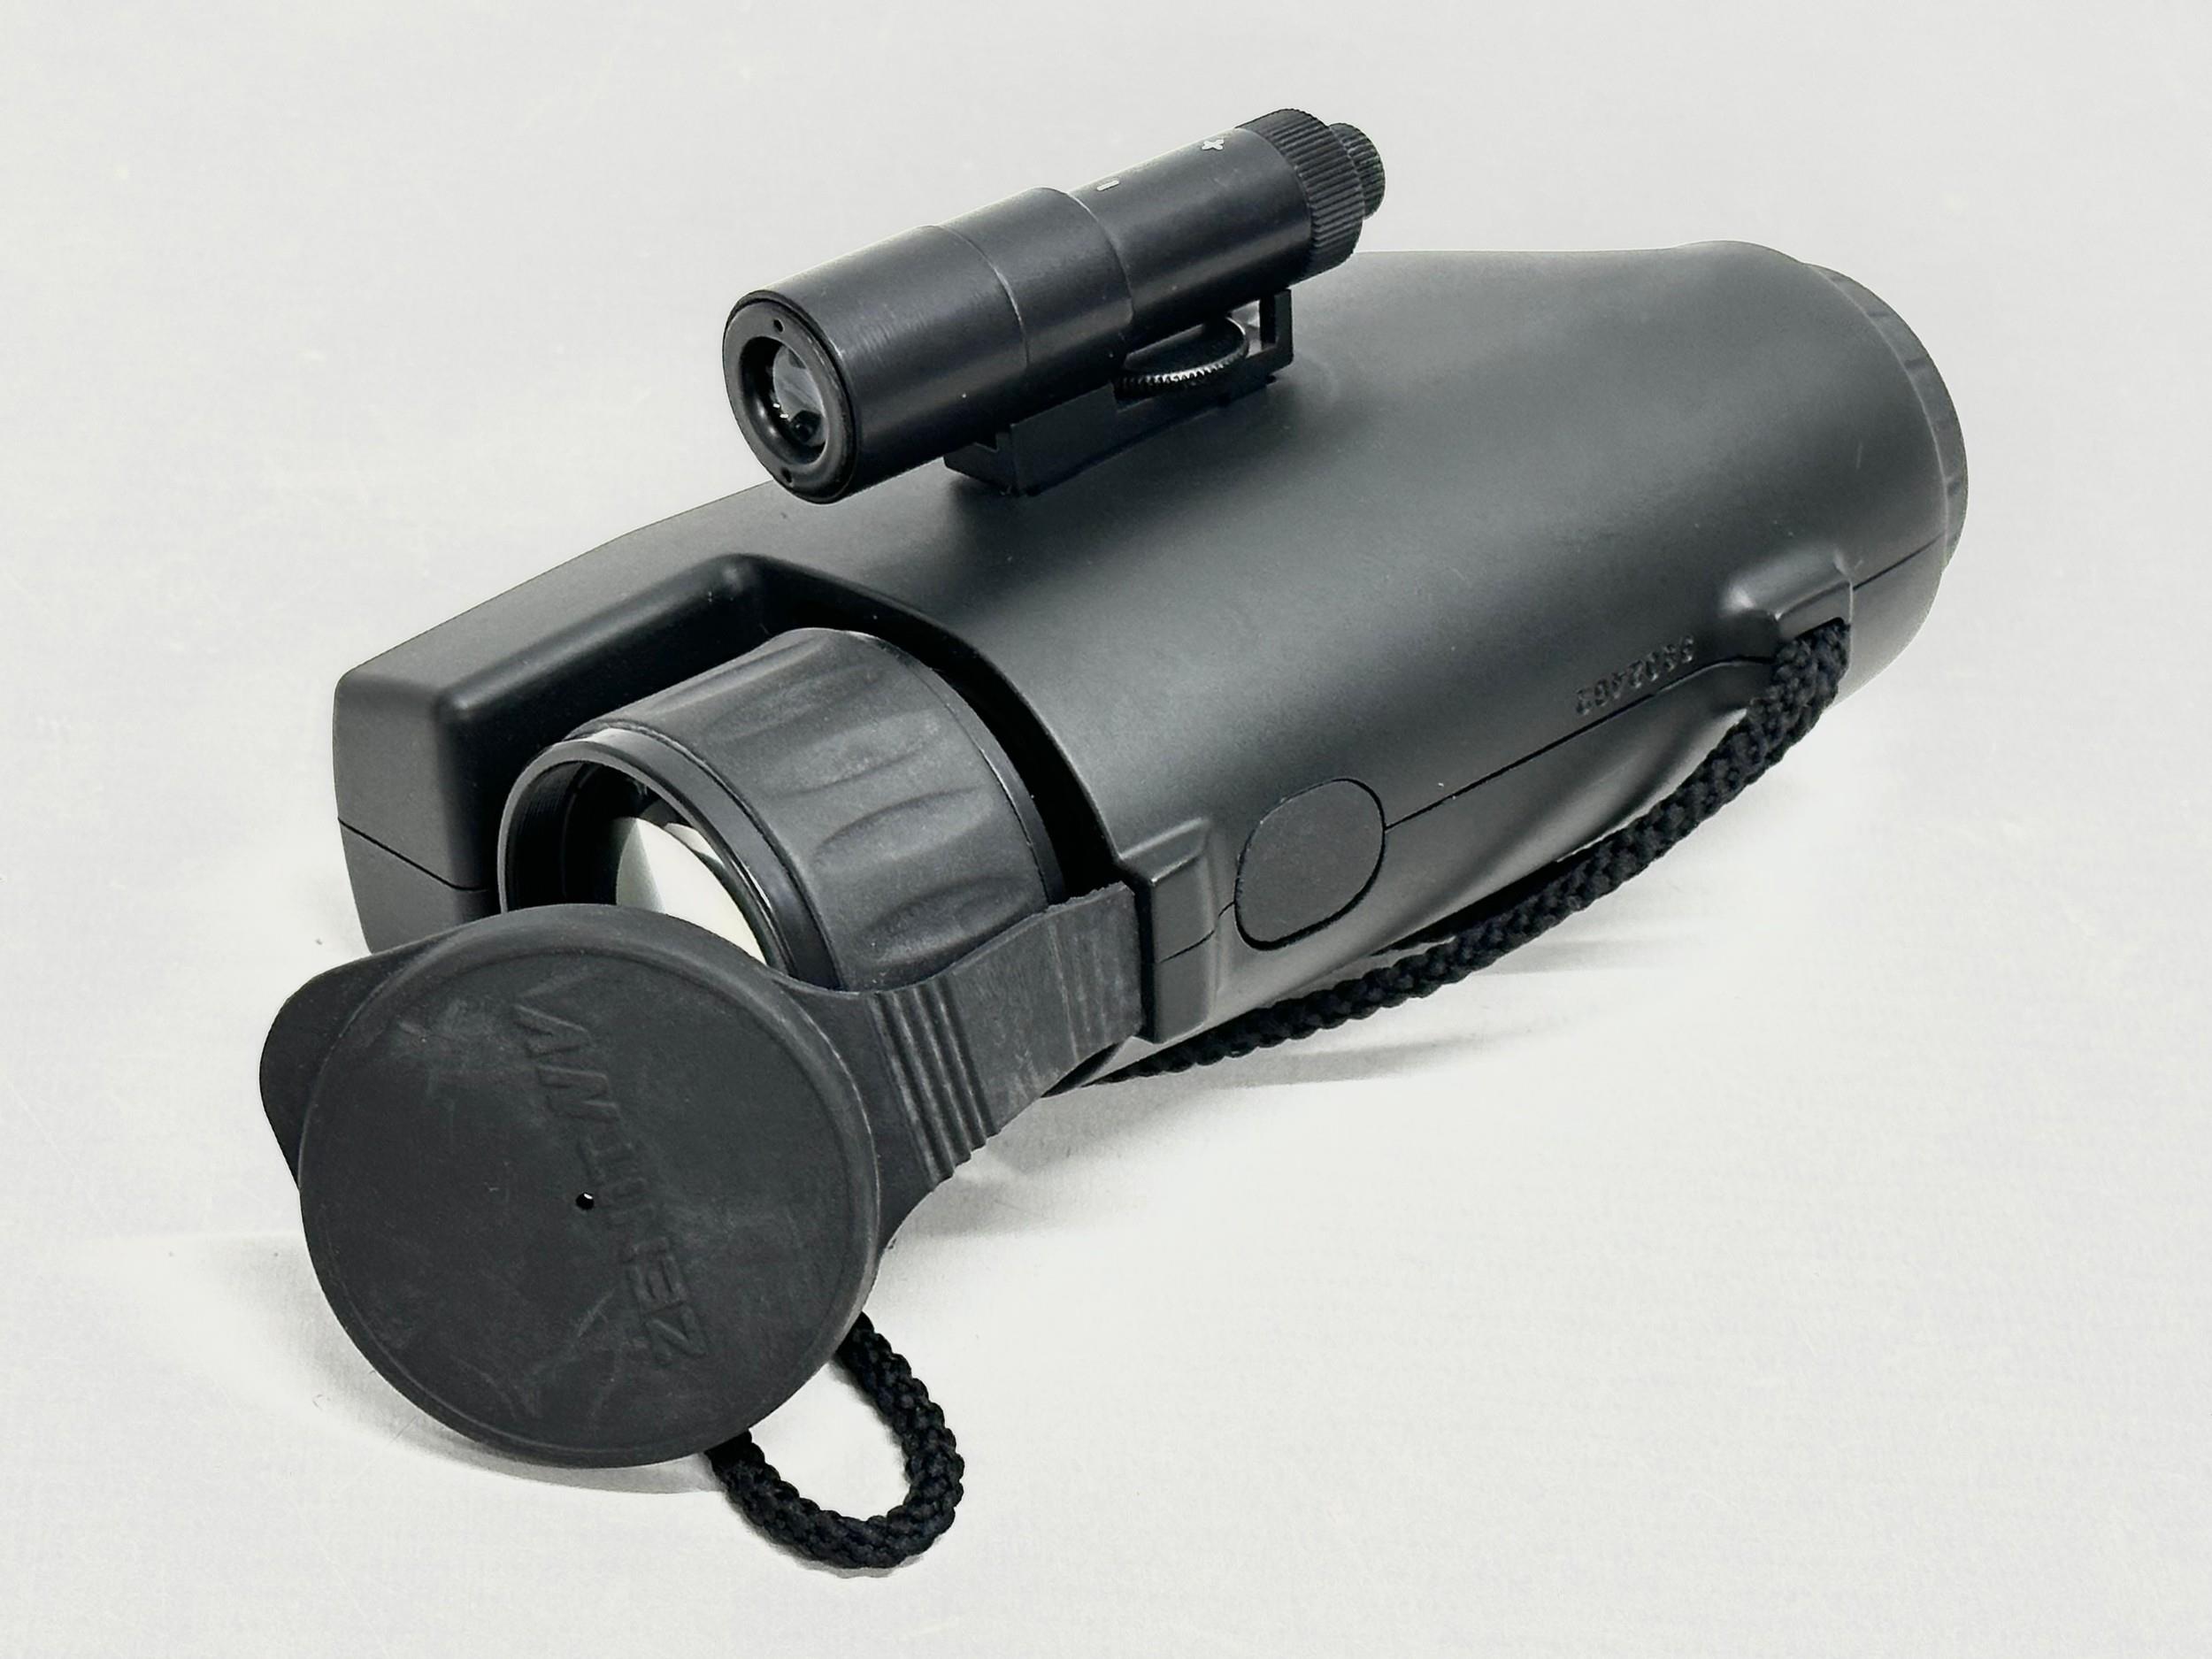 A Zenit NV Moonlight Night Vision scope with case - Image 5 of 6